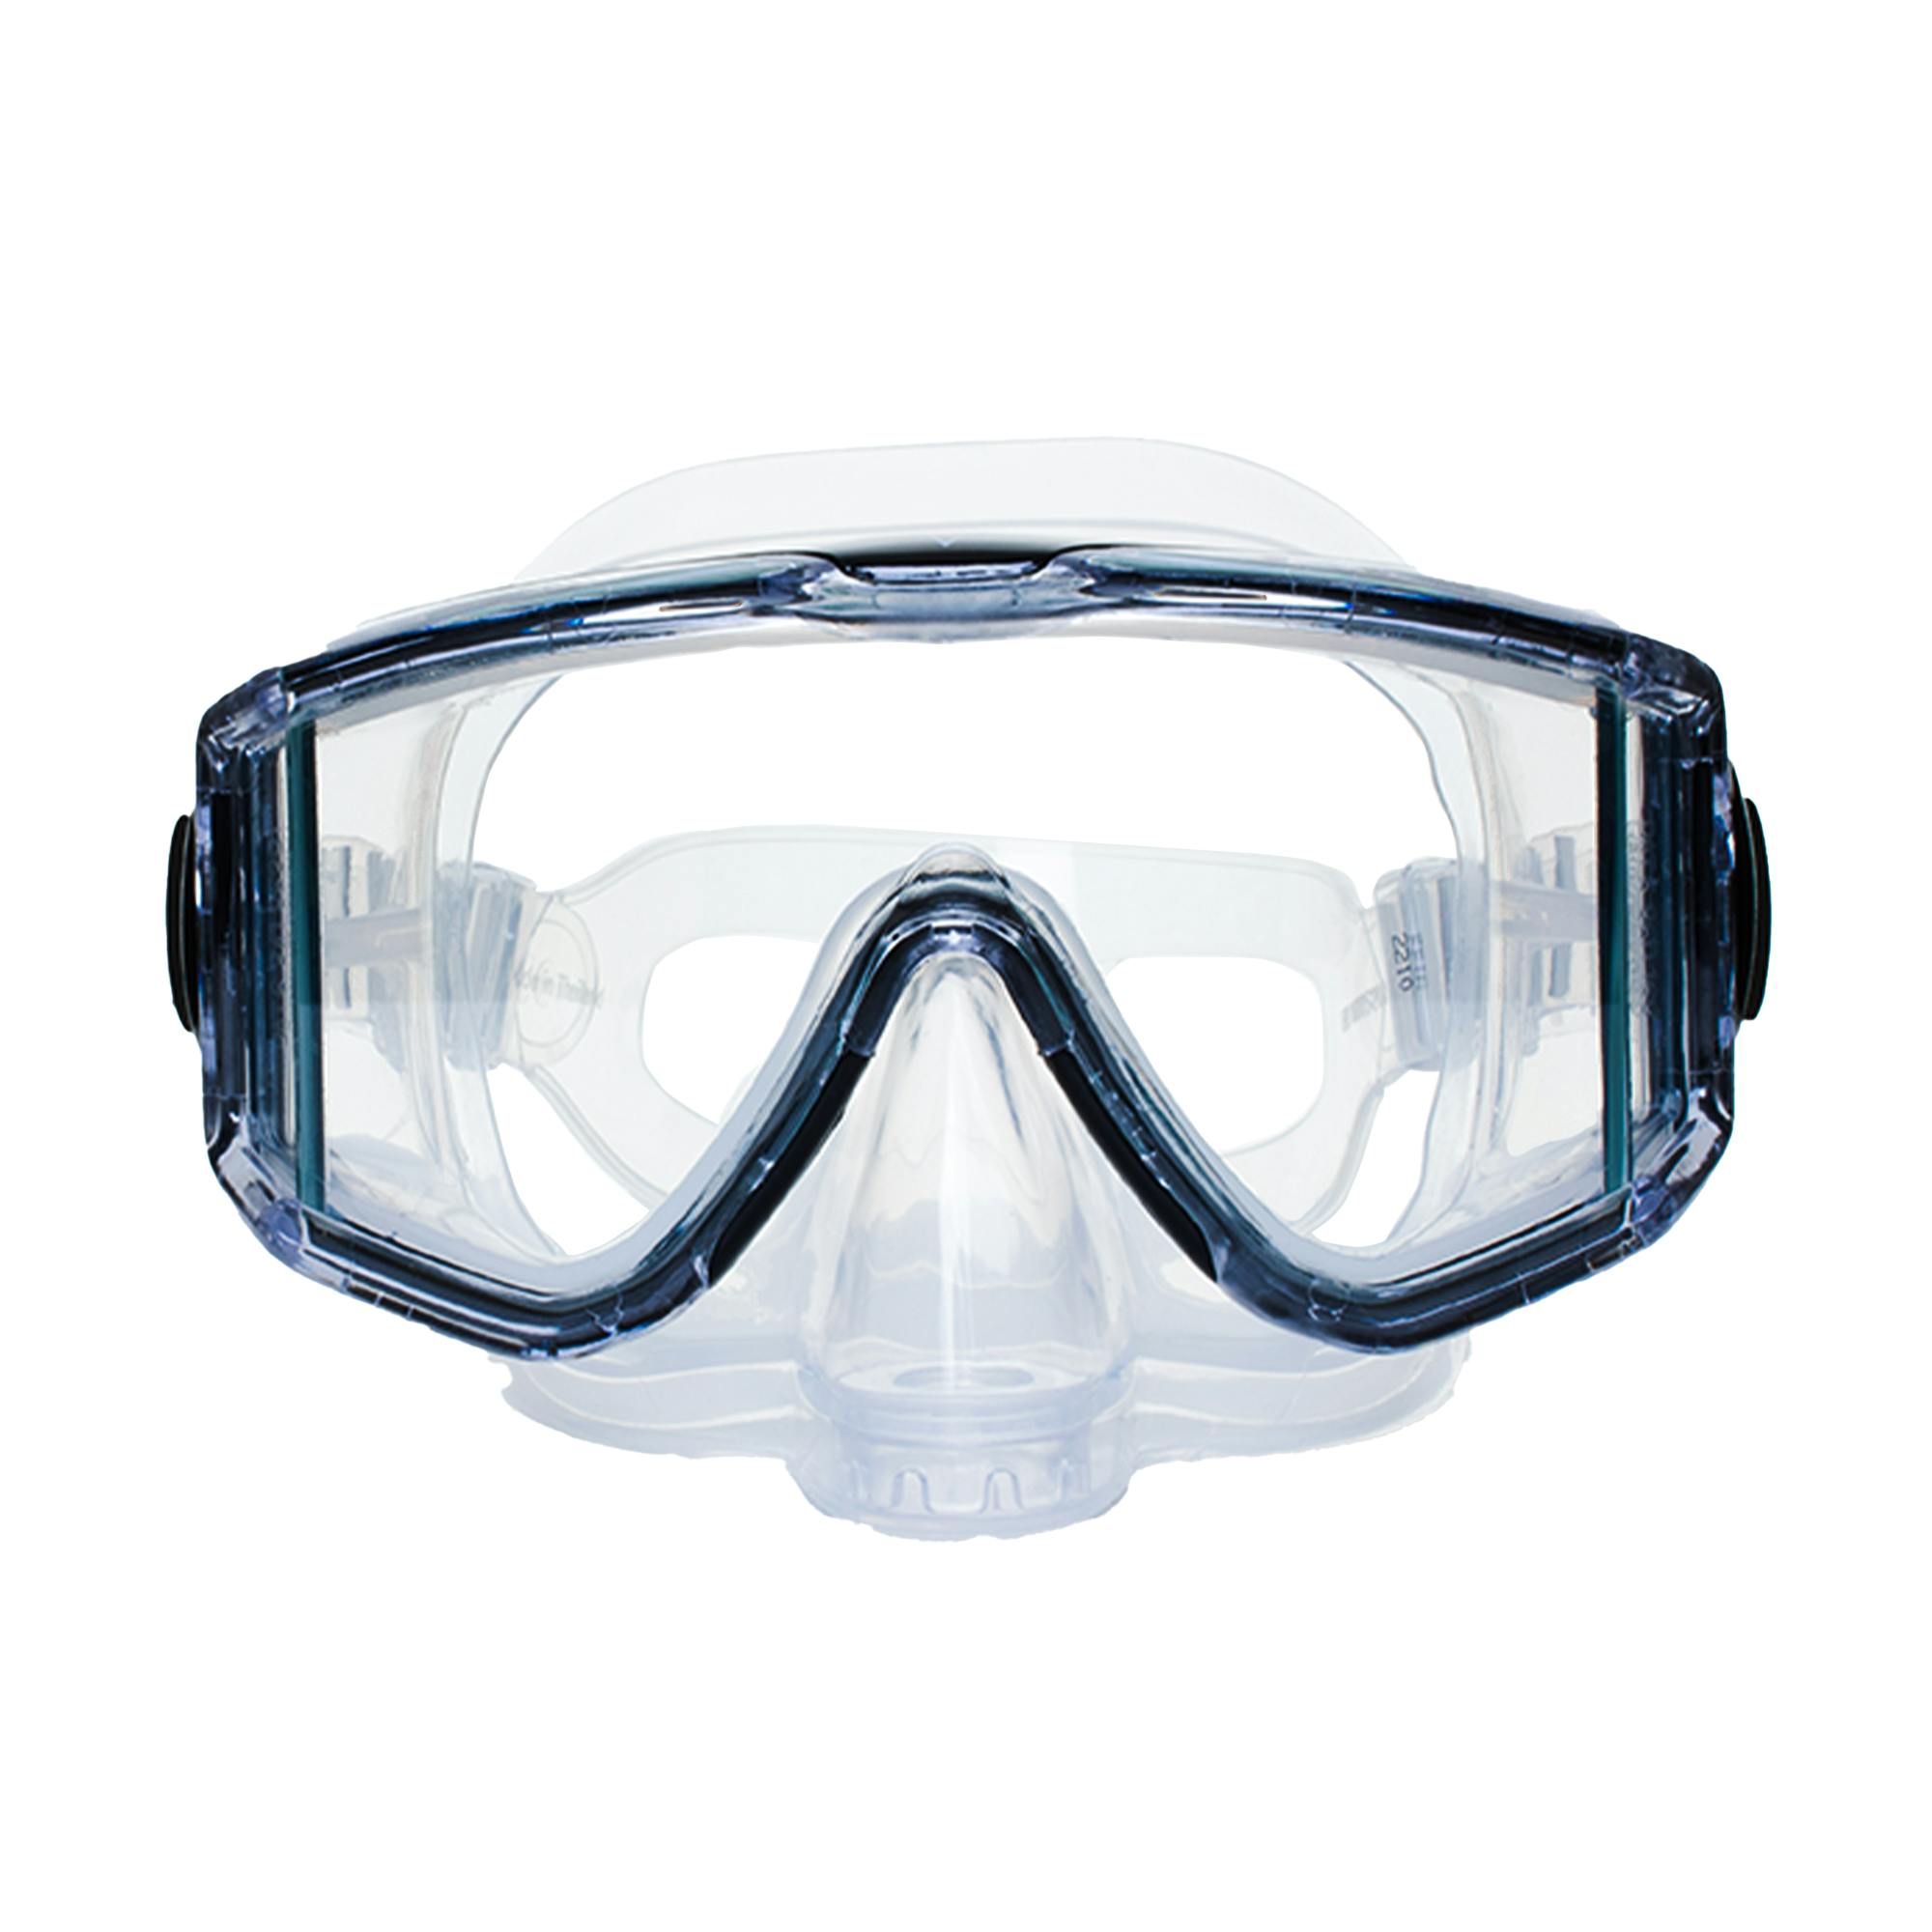 EVO Drift Purge Mask and Snorkel Combo - Black Front View